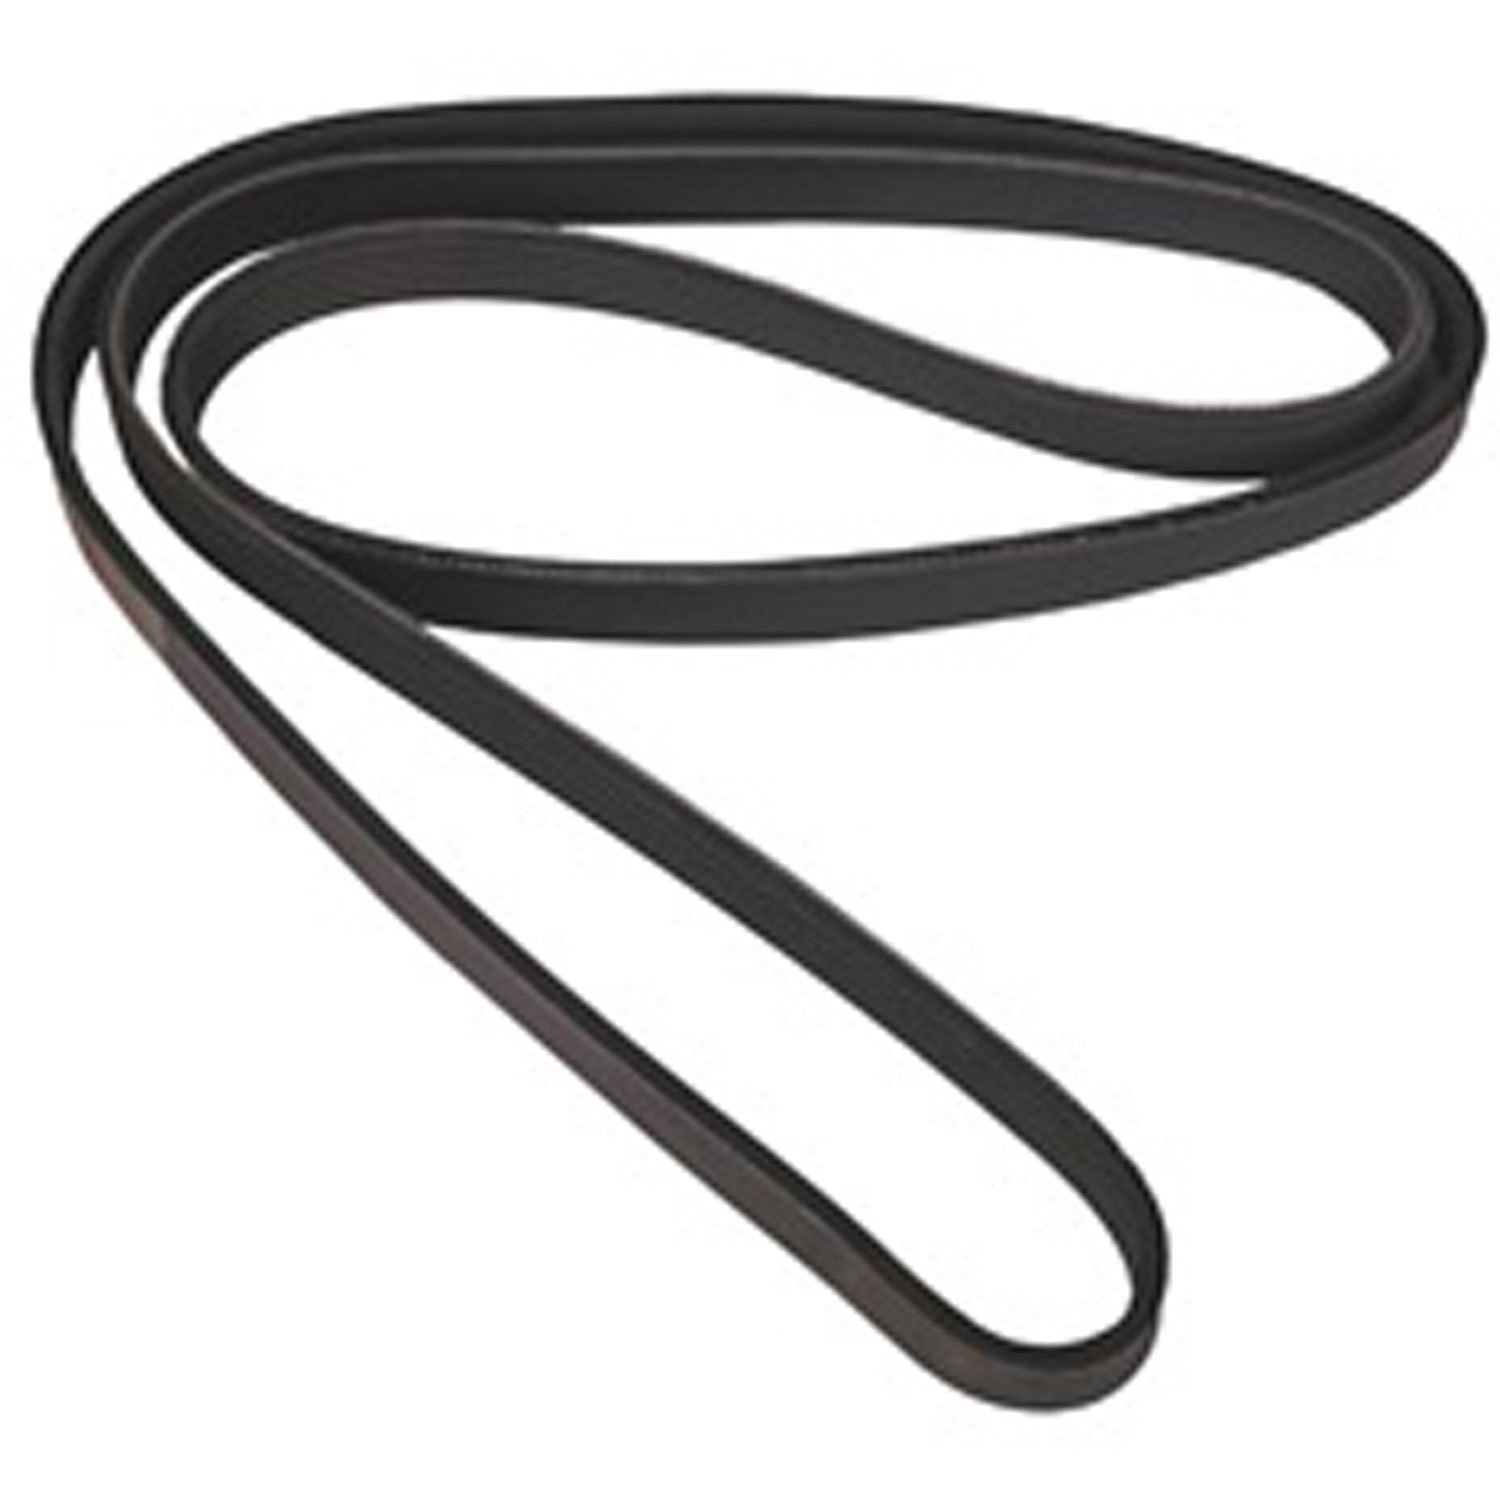 Replacement serpentine belt from Omix-ADA, Fits 91-95 Jeep Wrangler YJ with 4-cylinder and 6